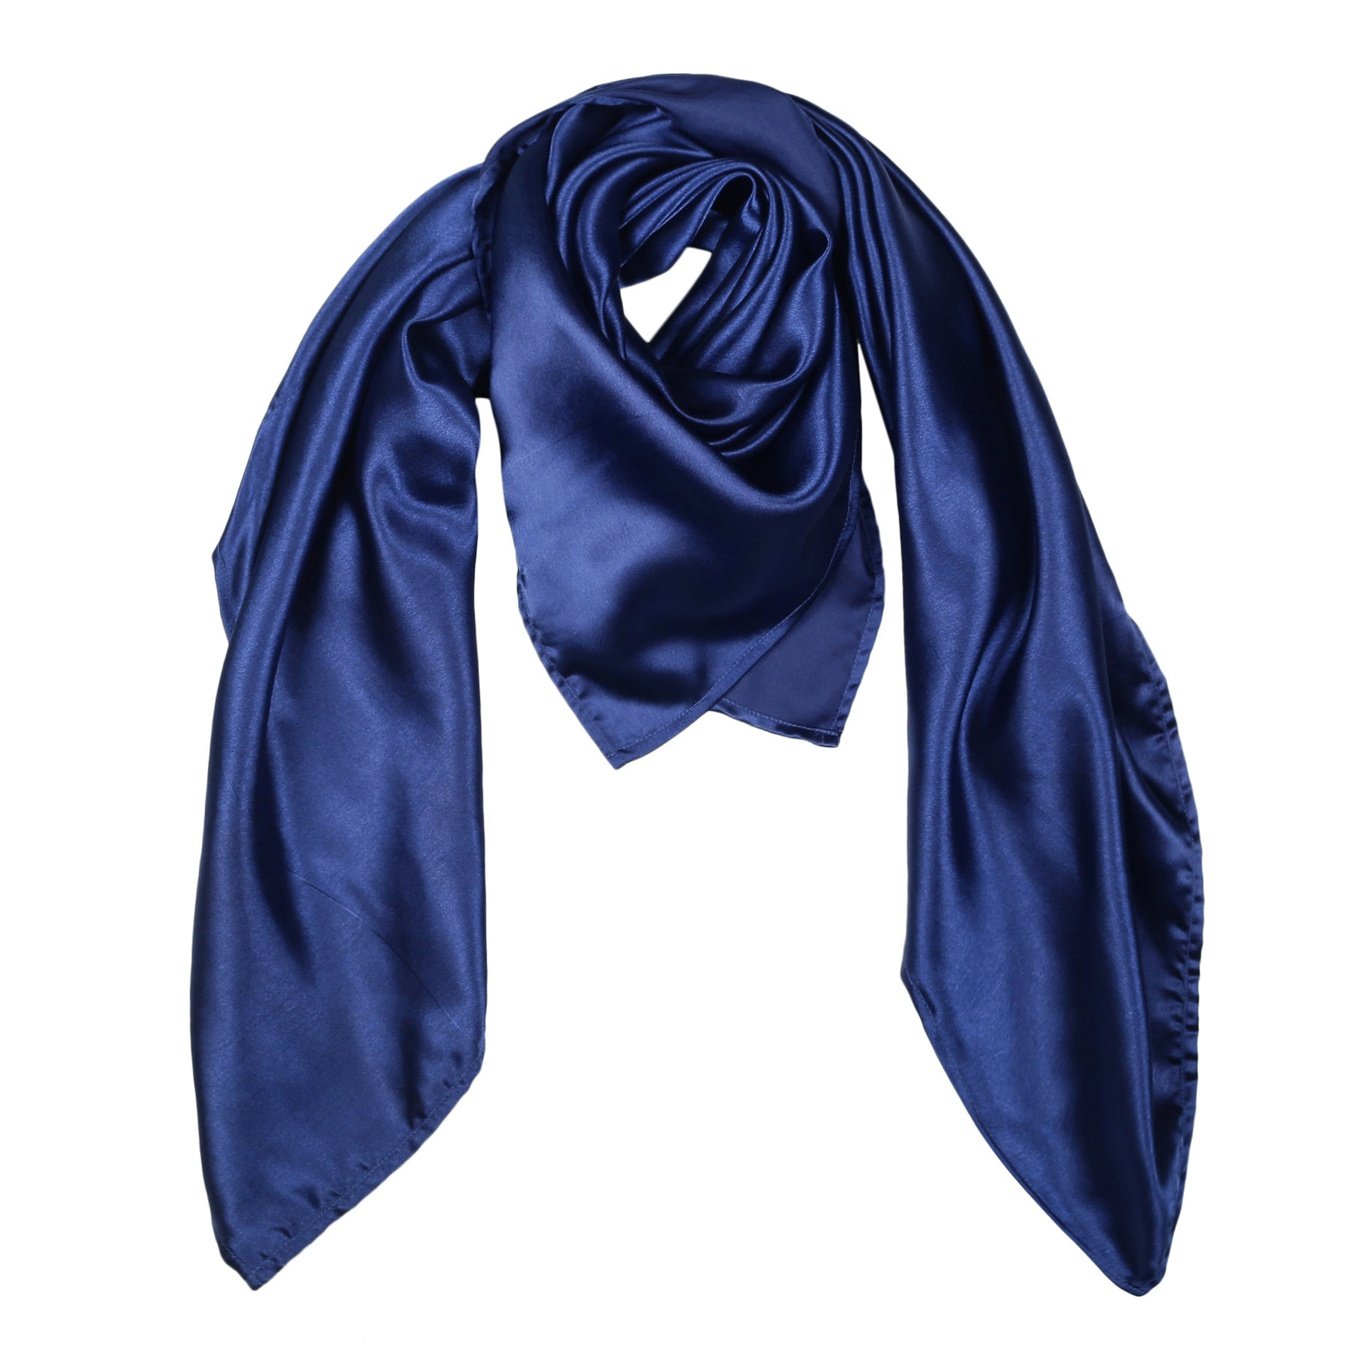 Buy Satin Scarf For Curly Hair Online